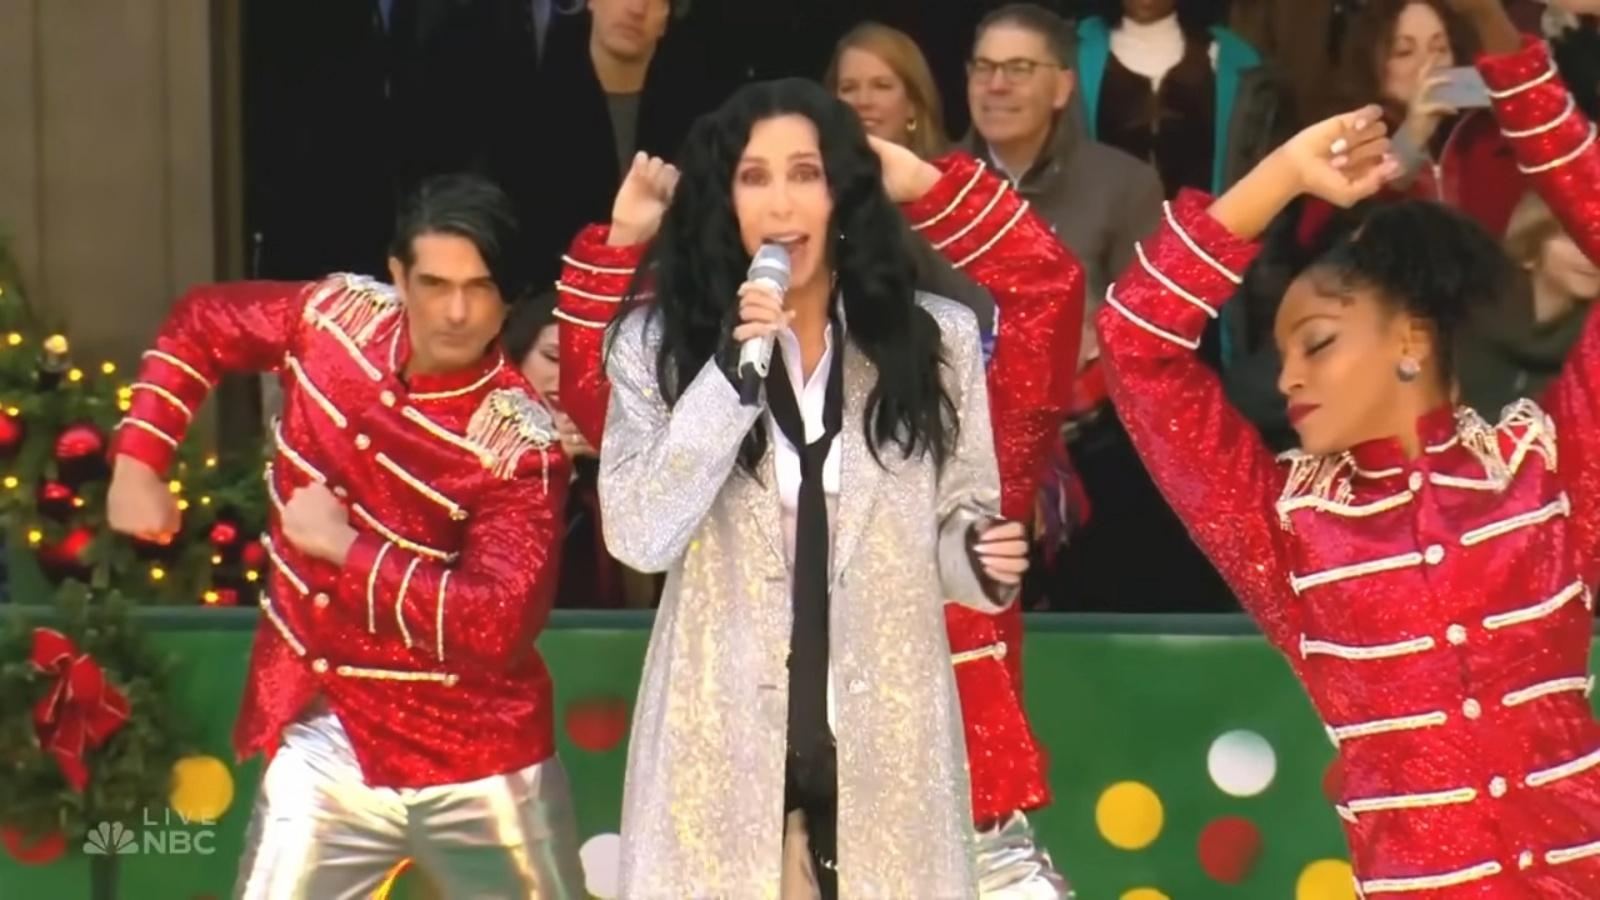 Flavor Flav fanboys over Cher at Macy’s Thanksgiving Day Parade and